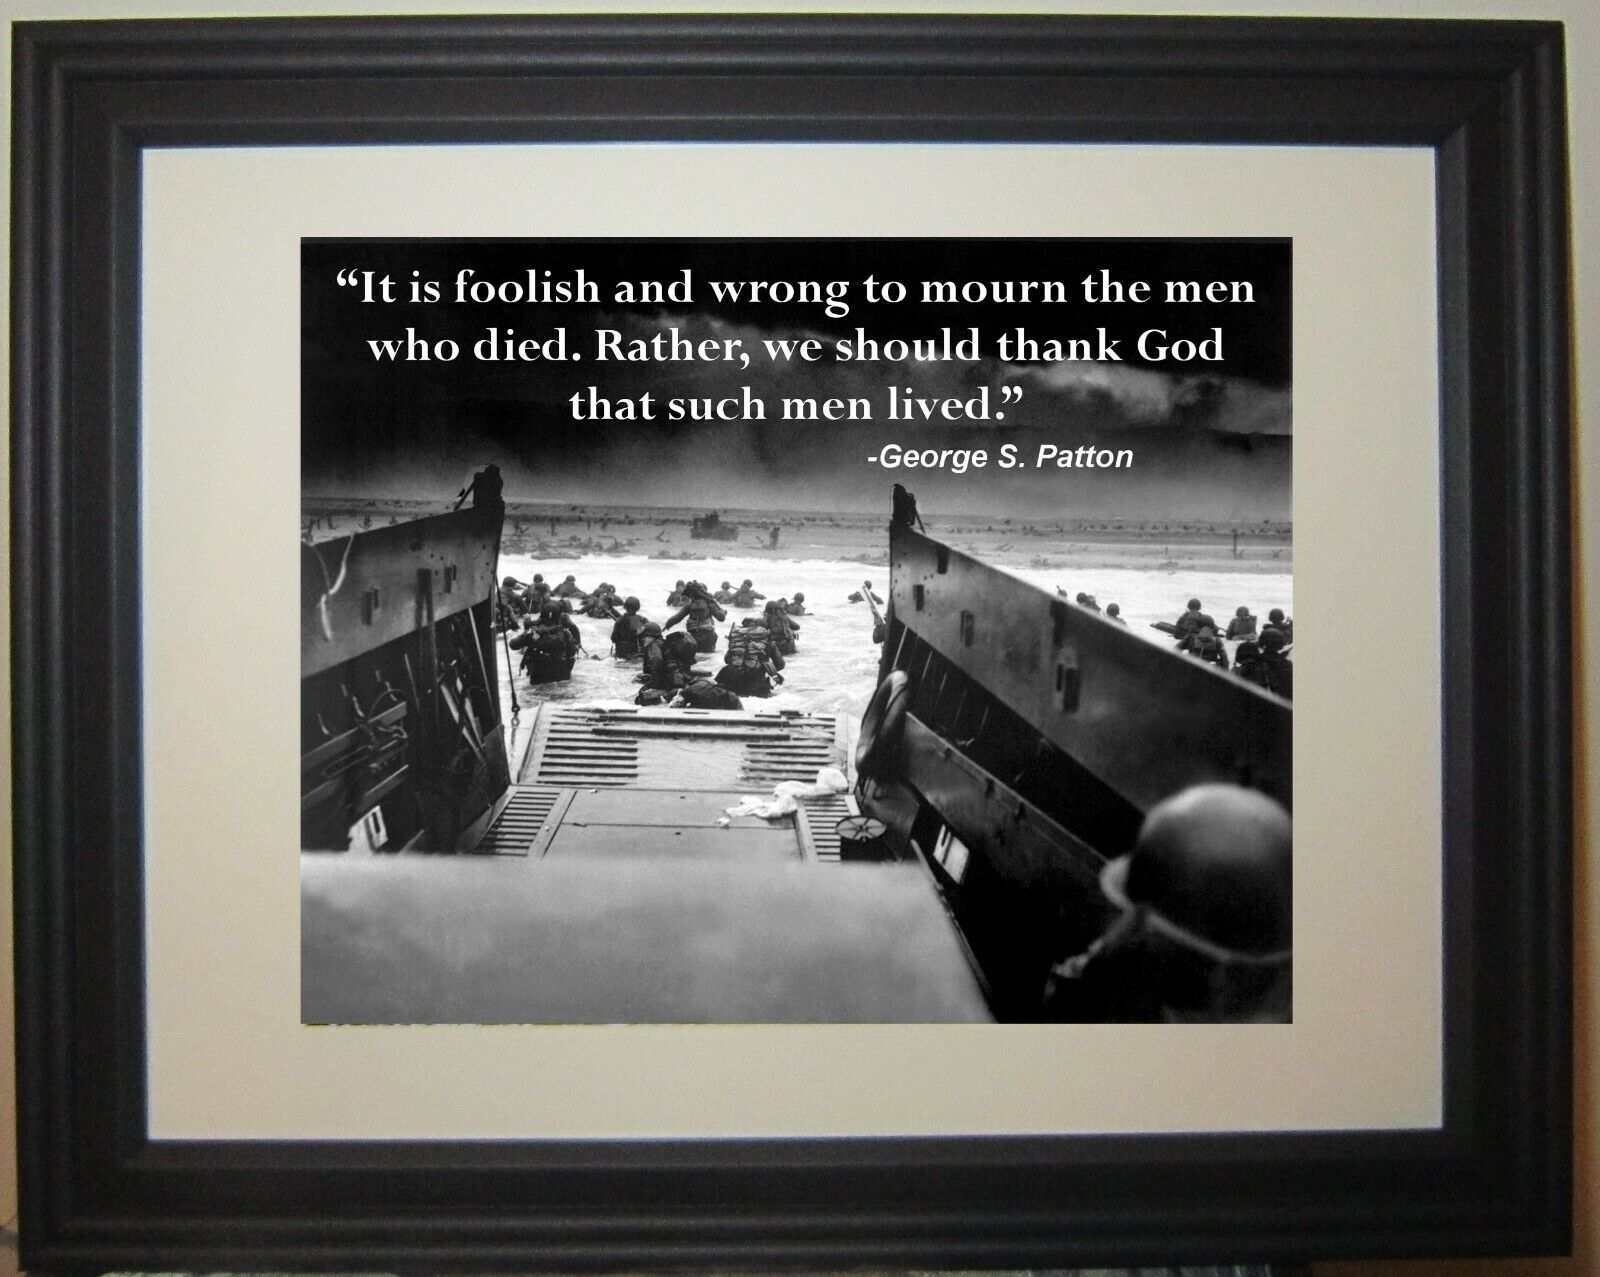 General George S. Patton World War 2 WWII dday D-Day Famous Quote Framed Photo 